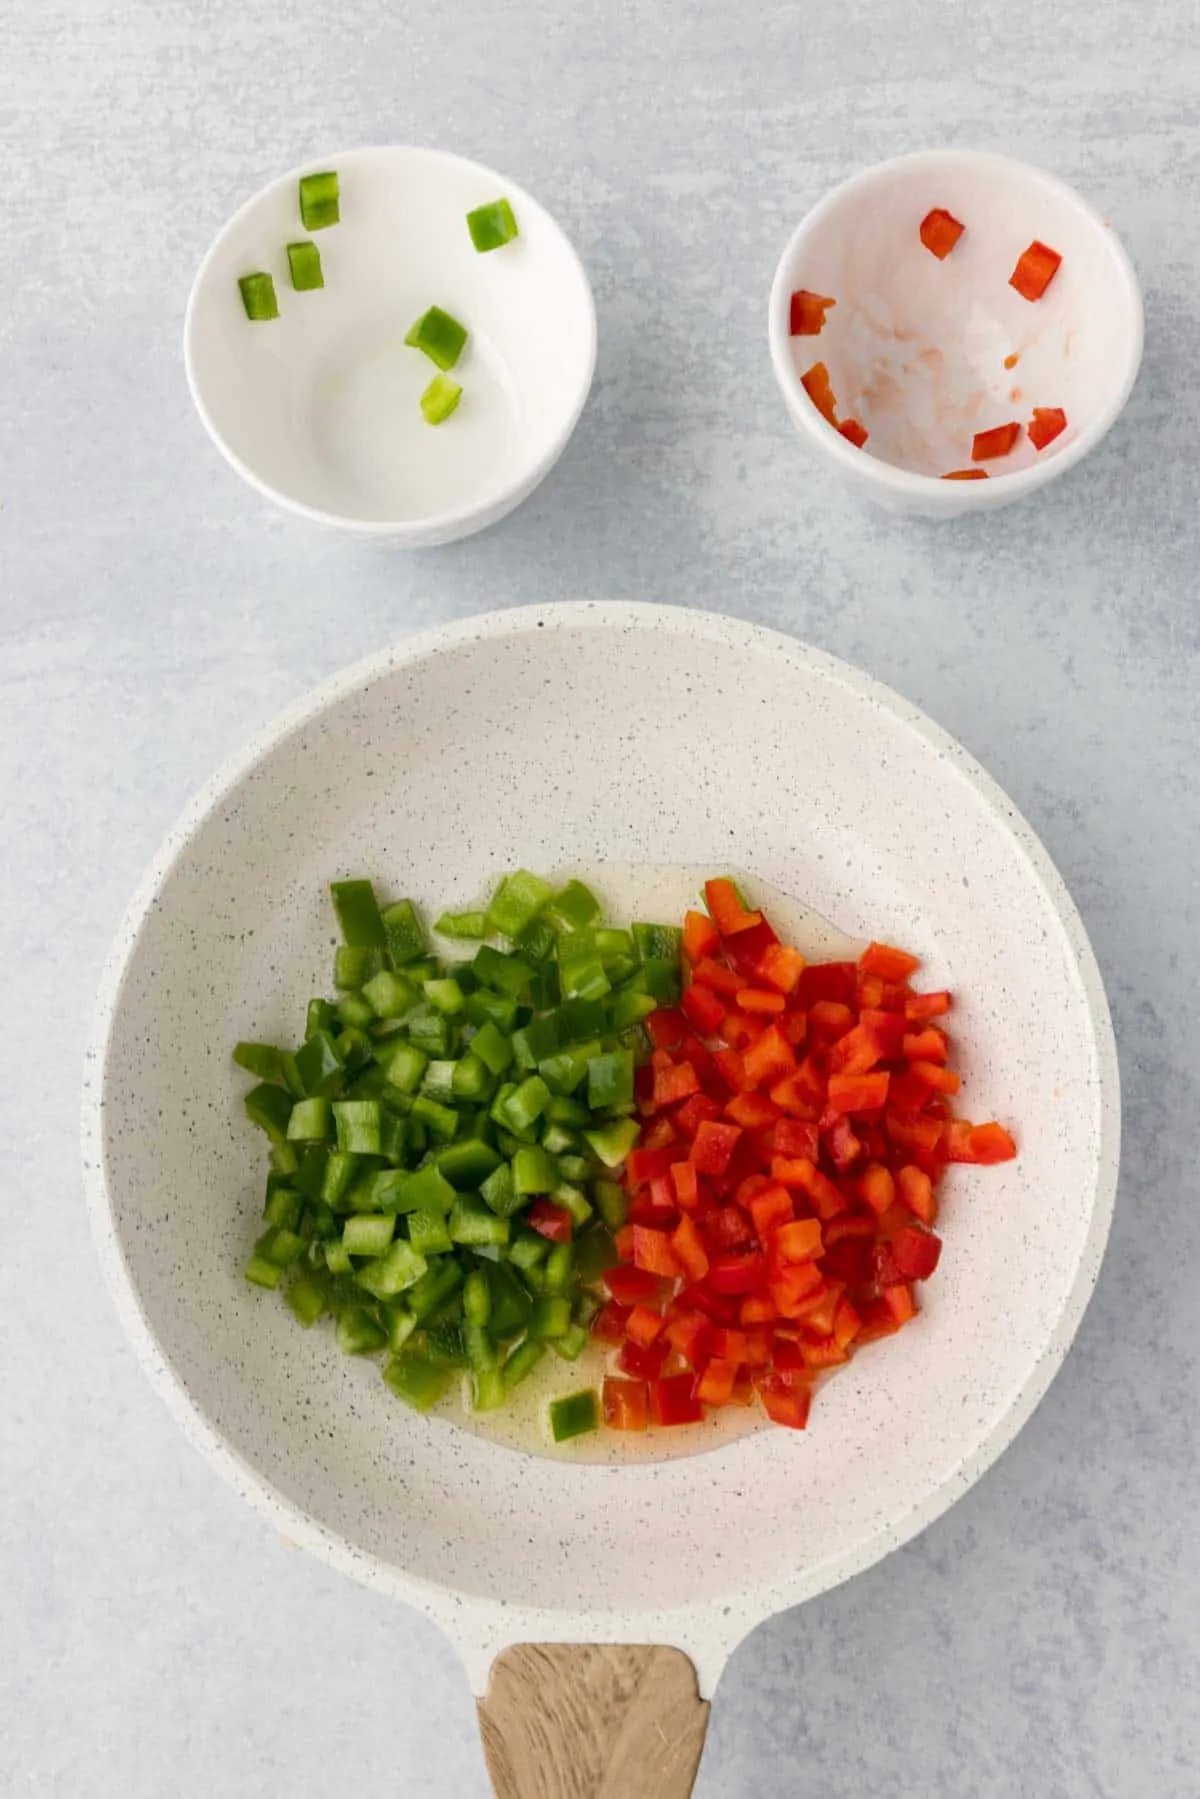 diced red and green bell peppers in a skillet